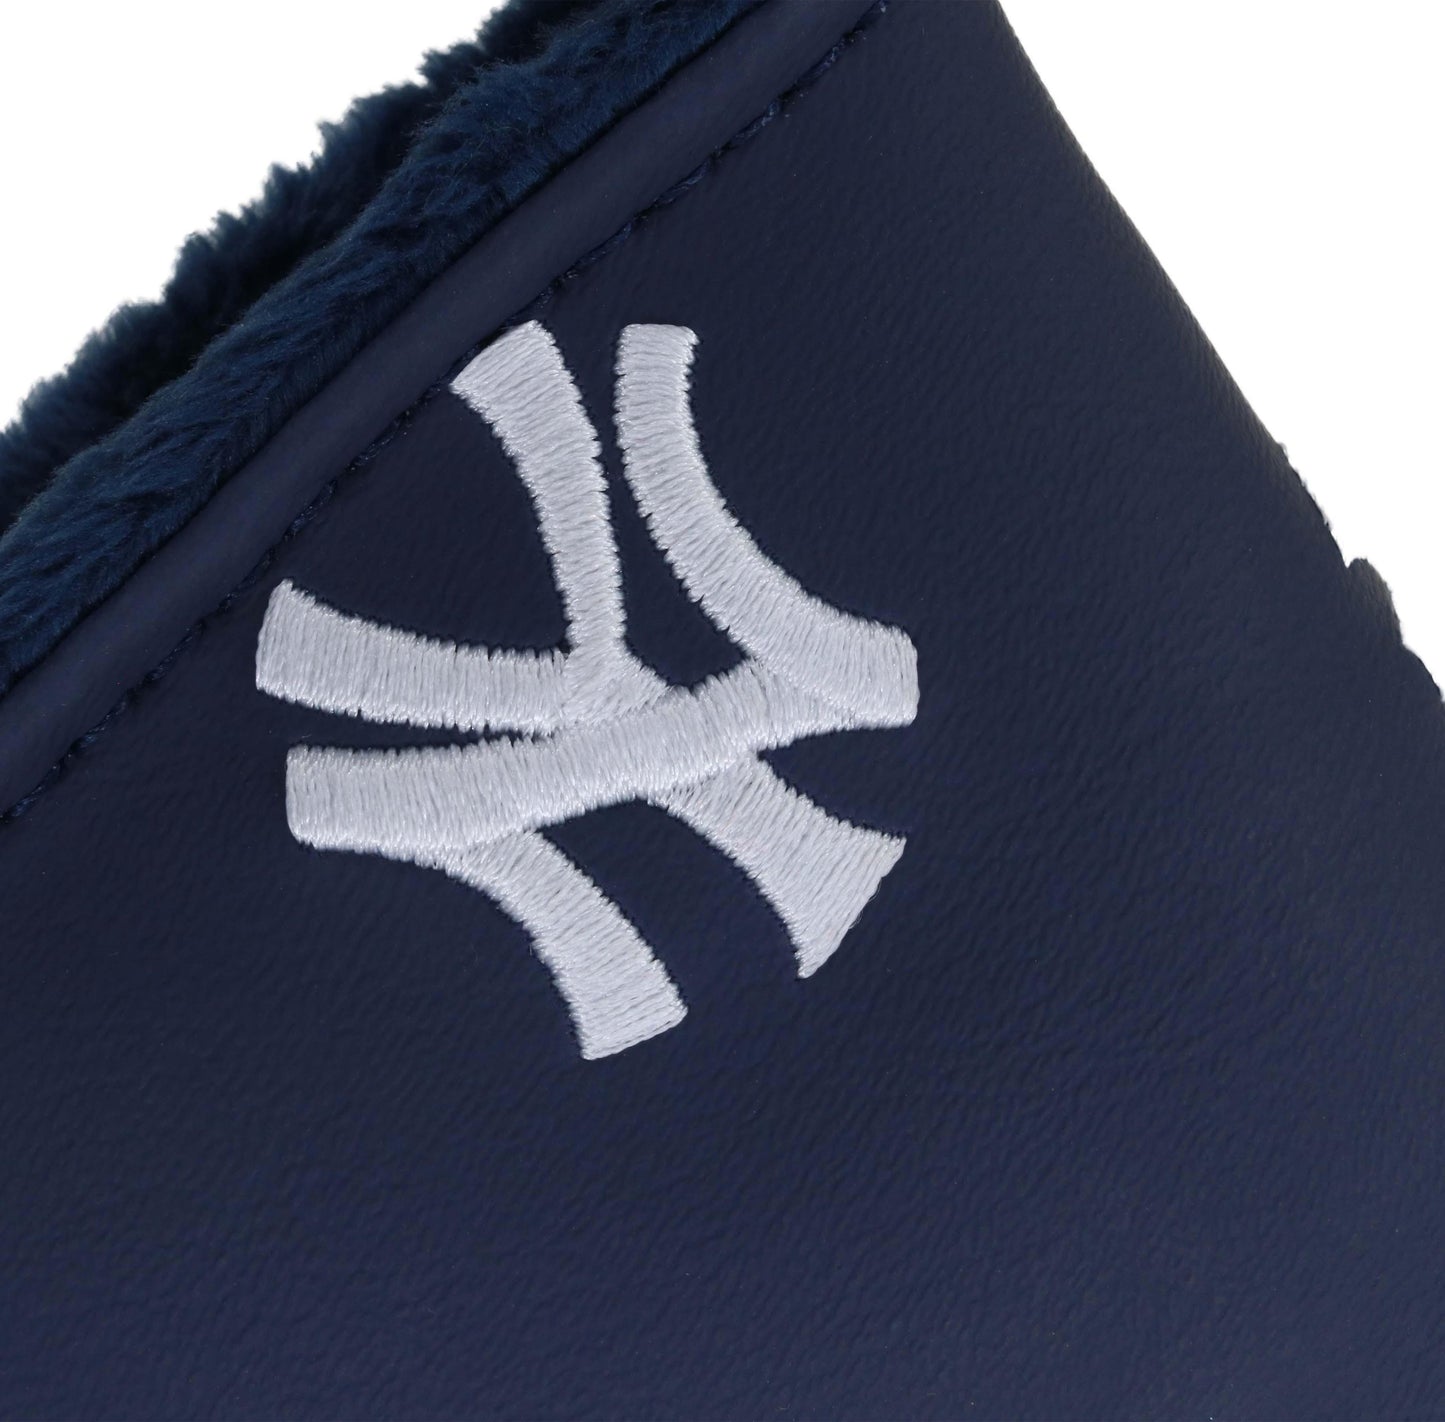 
                  
                    New York Yankees - MLB Blade Putter Cover - EP Headcovers
                  
                